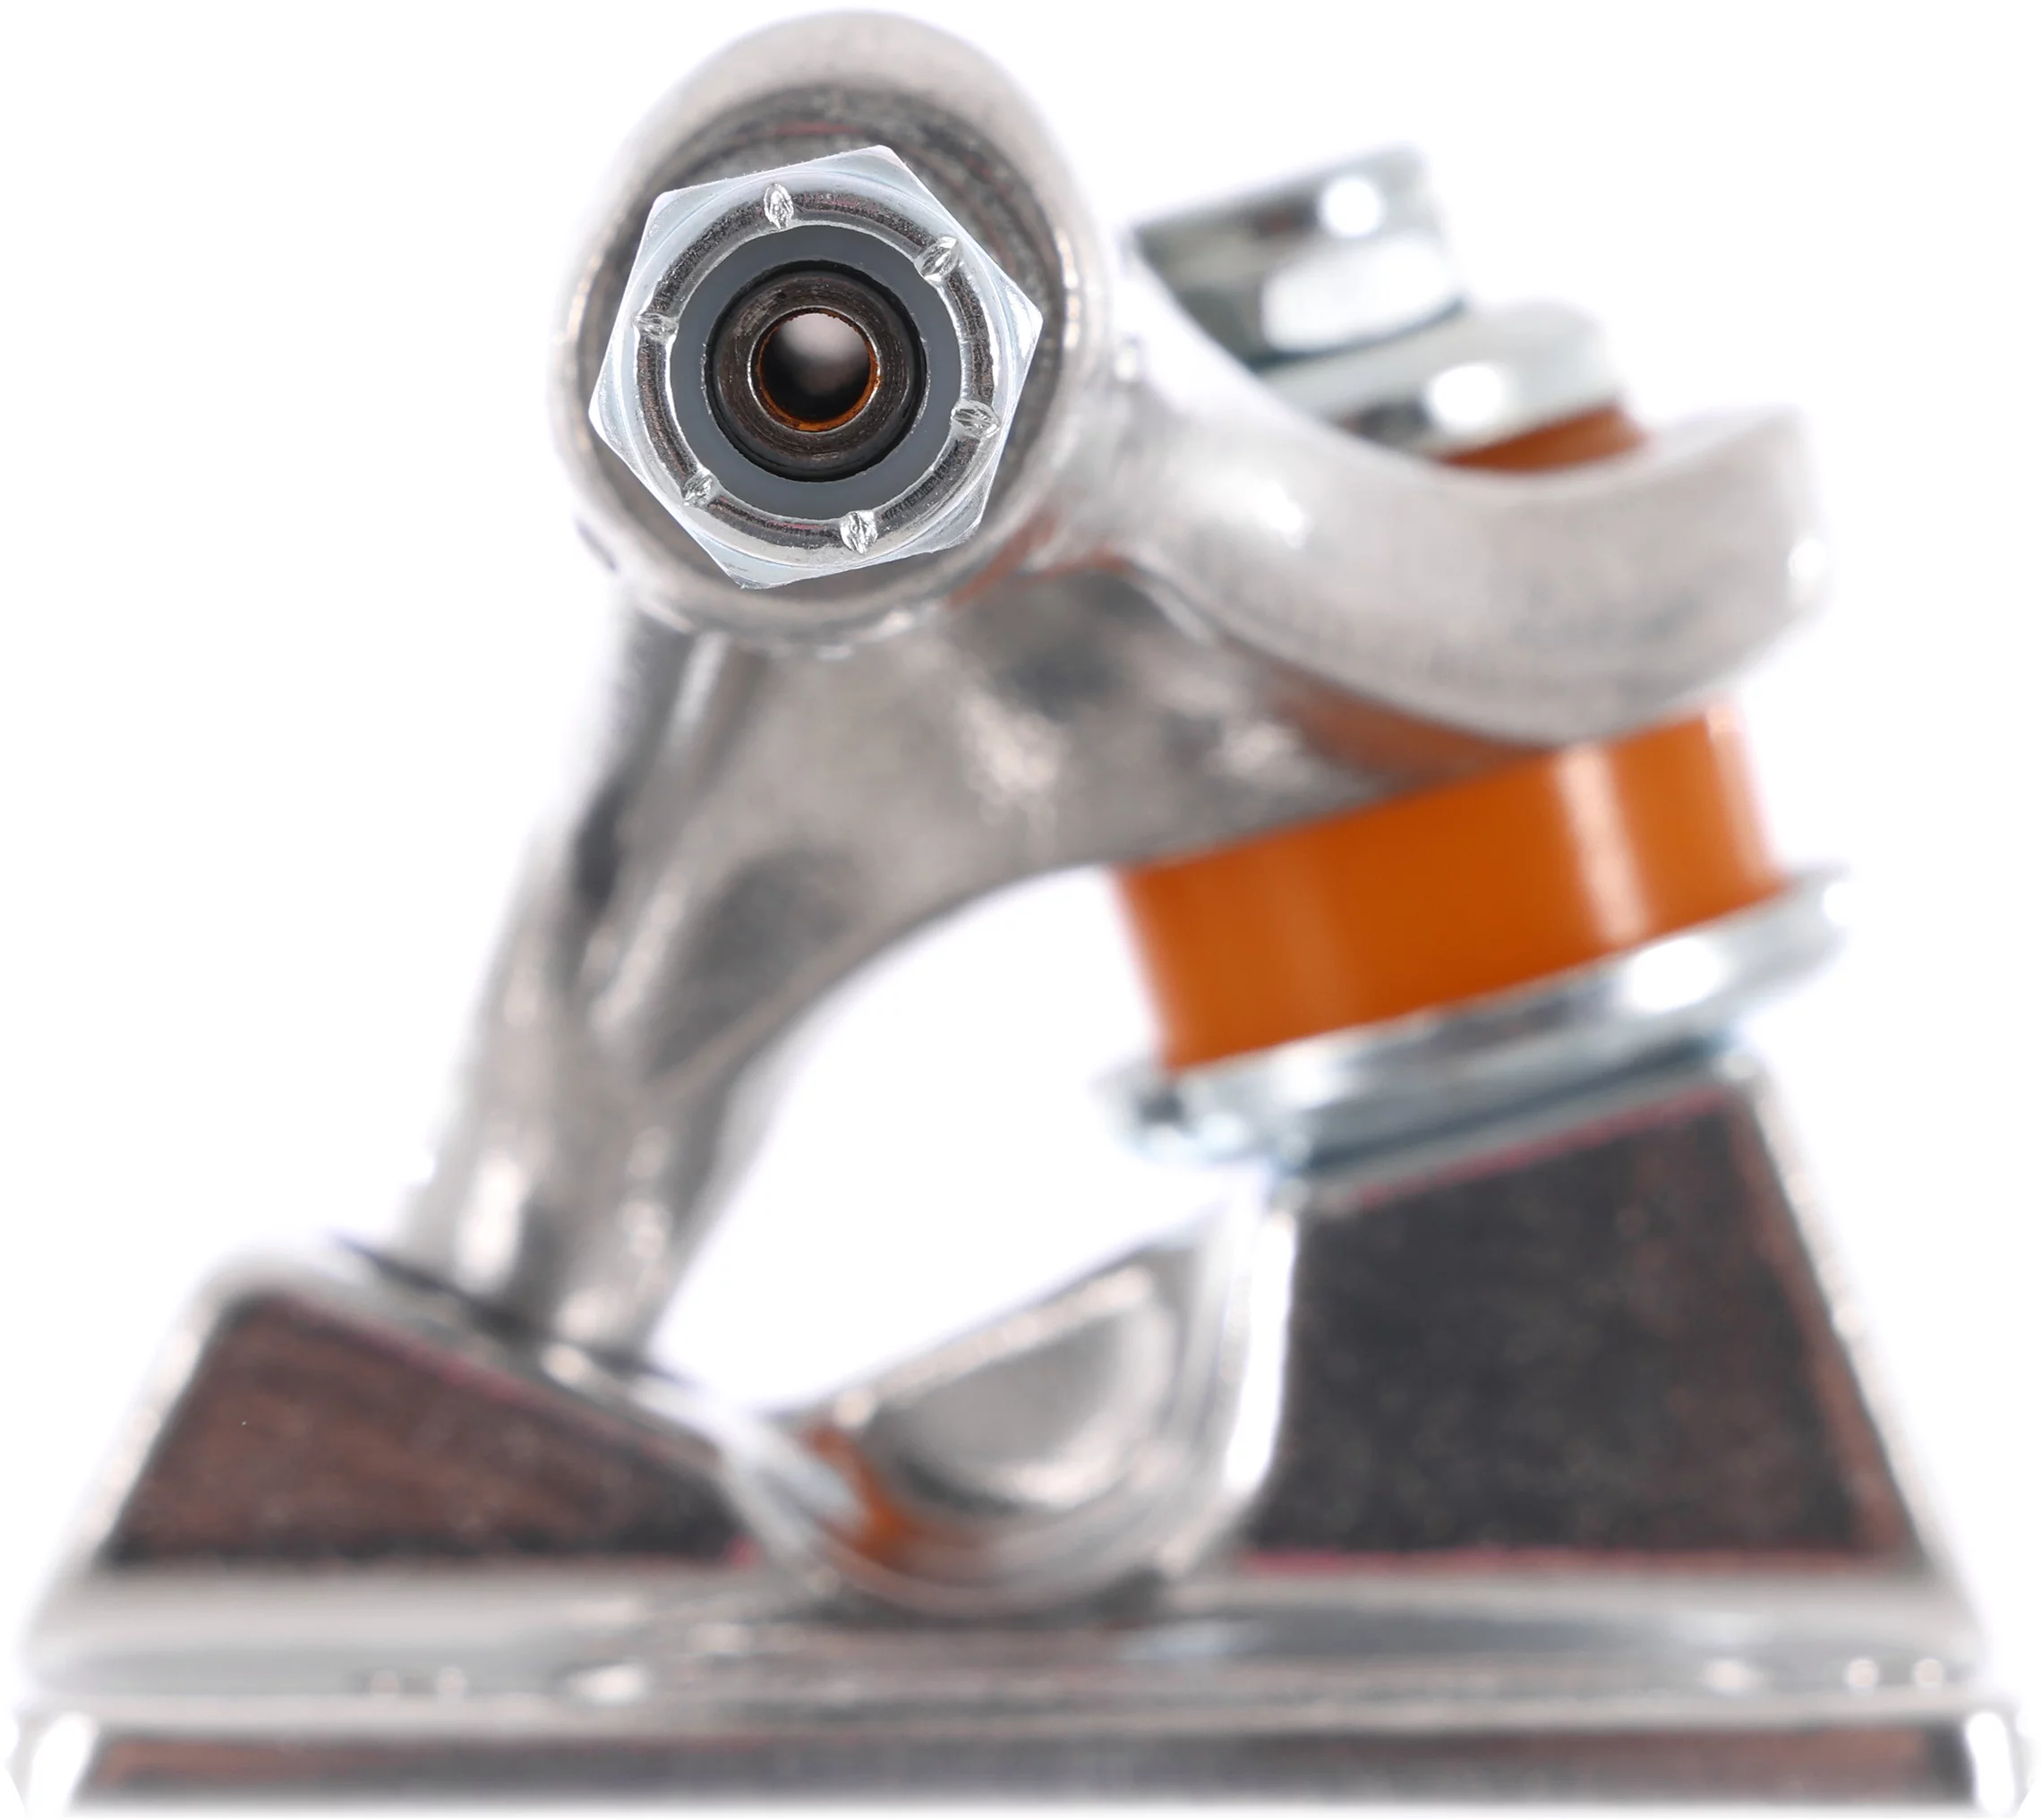 Independent Forged Hollow Stage 11 Skateboard Trucks - silver 149